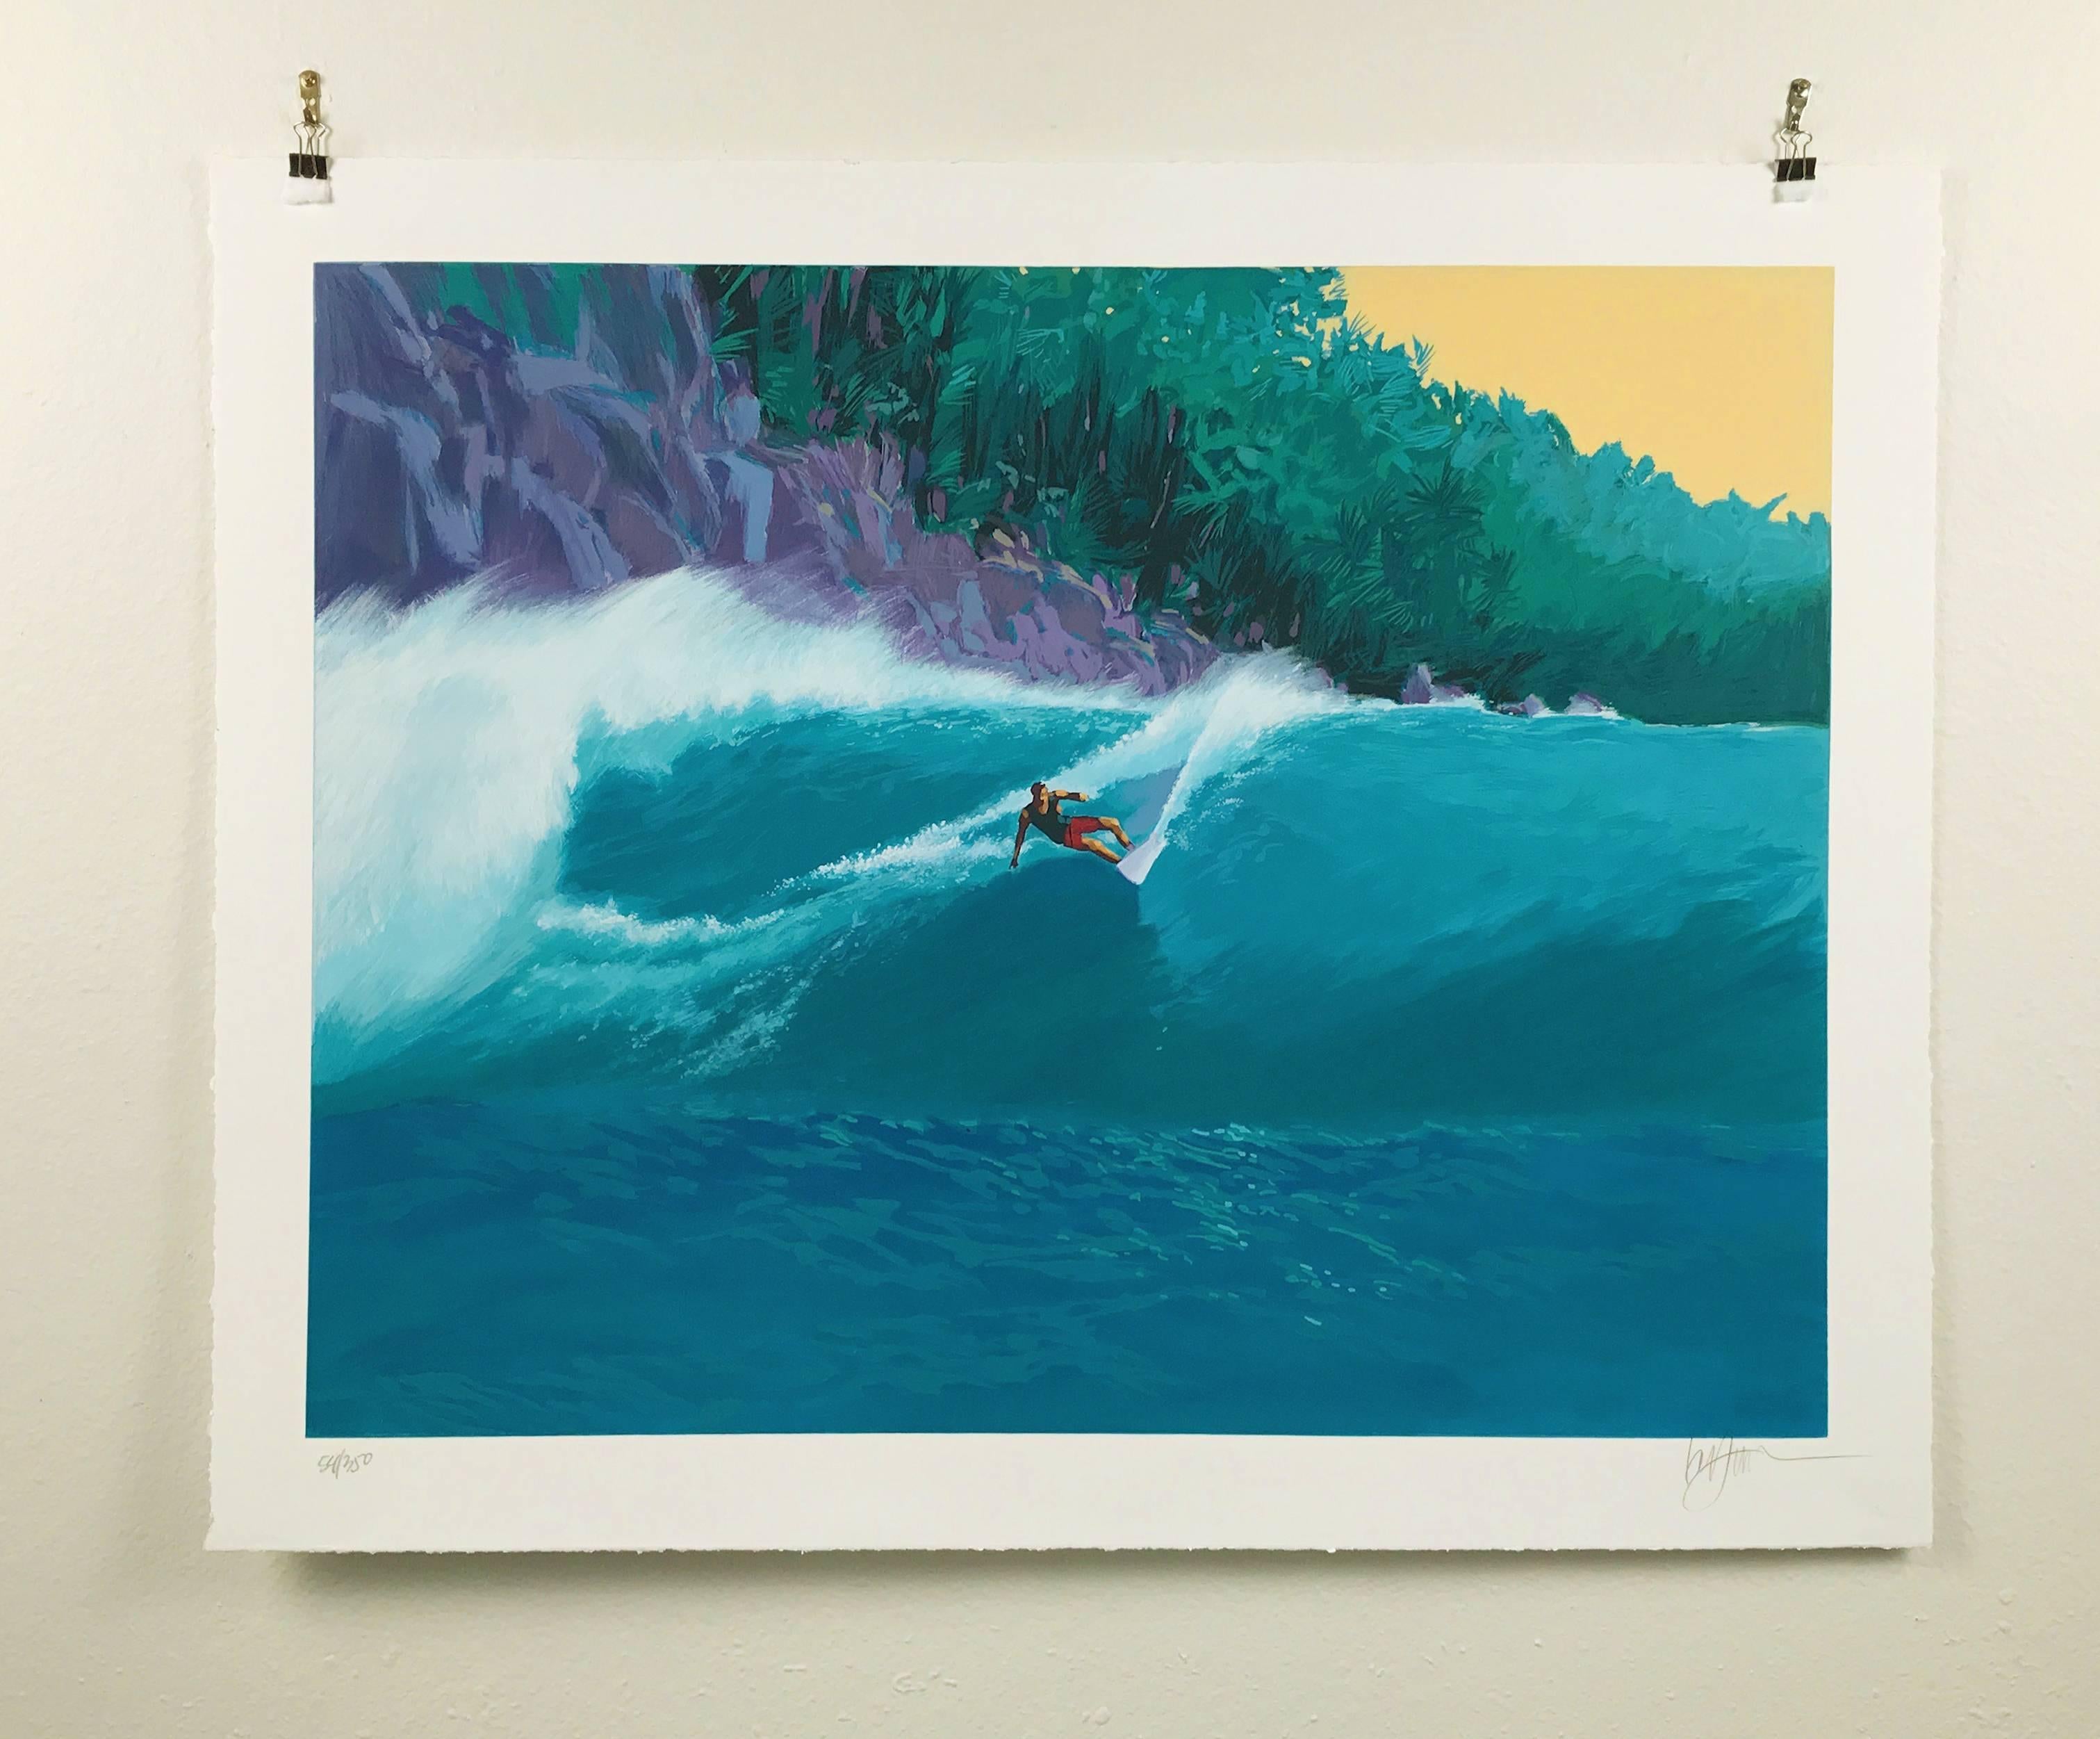 Ken grew up with his feet deeply planted in the surfing culture. Caught up in the ground swell of the 1960s surfing culture, Ken not only plunged into the sport of surfing but into the art and graphics of surfing as well.

While working his way